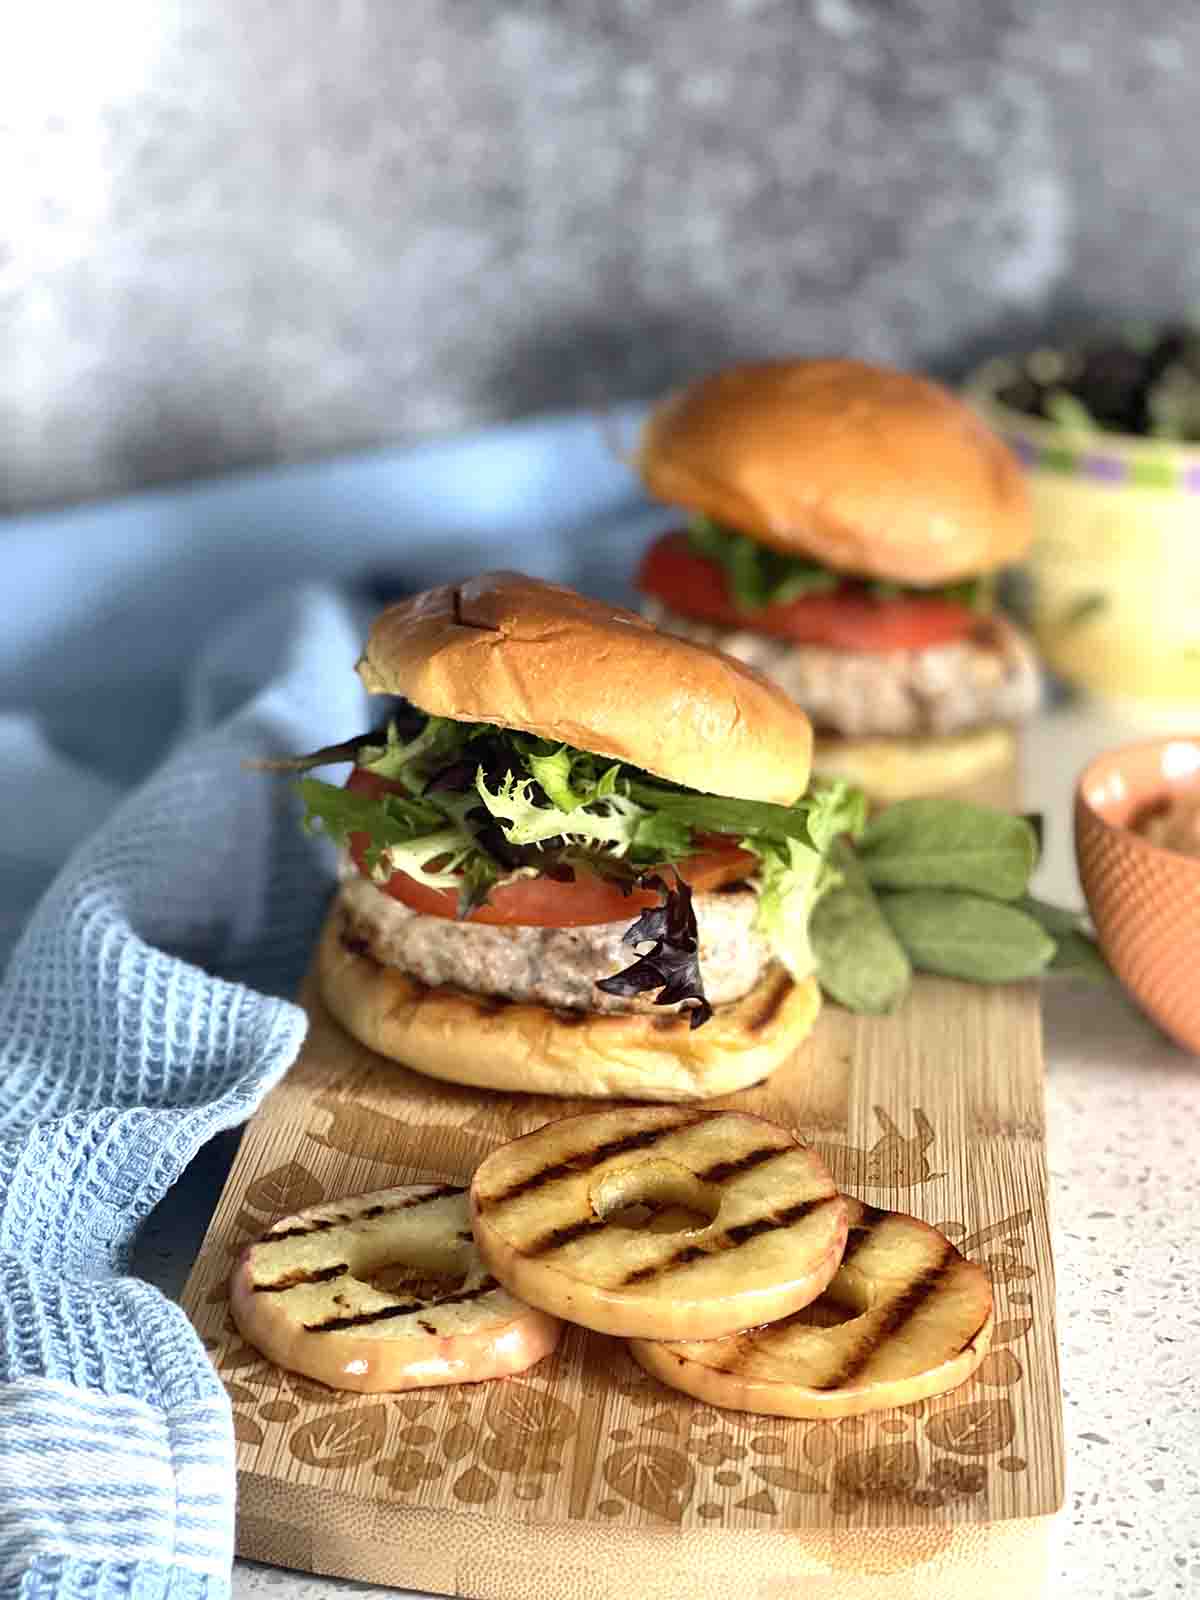 pork burger with apple in front.